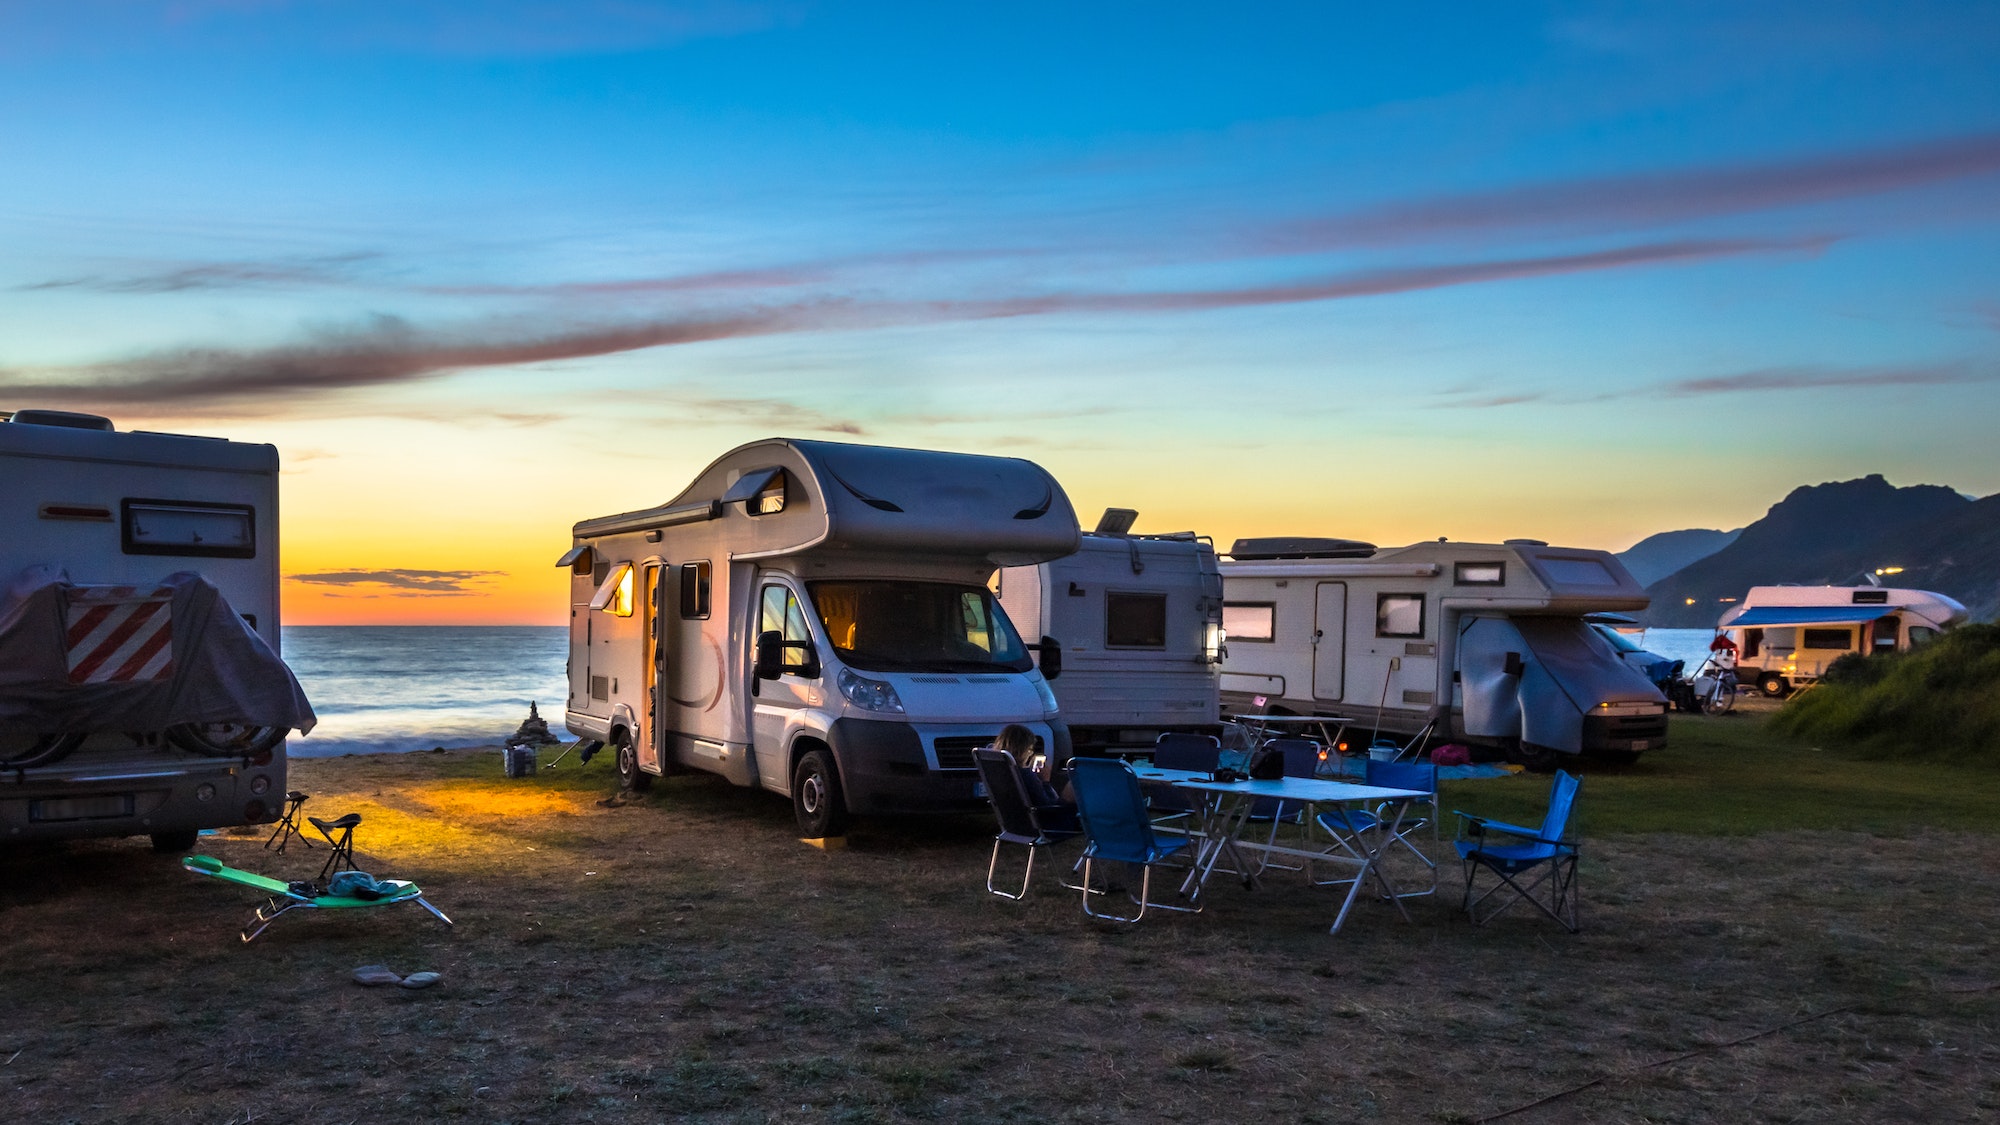 Campers – Take Your Vacation To The Next Level